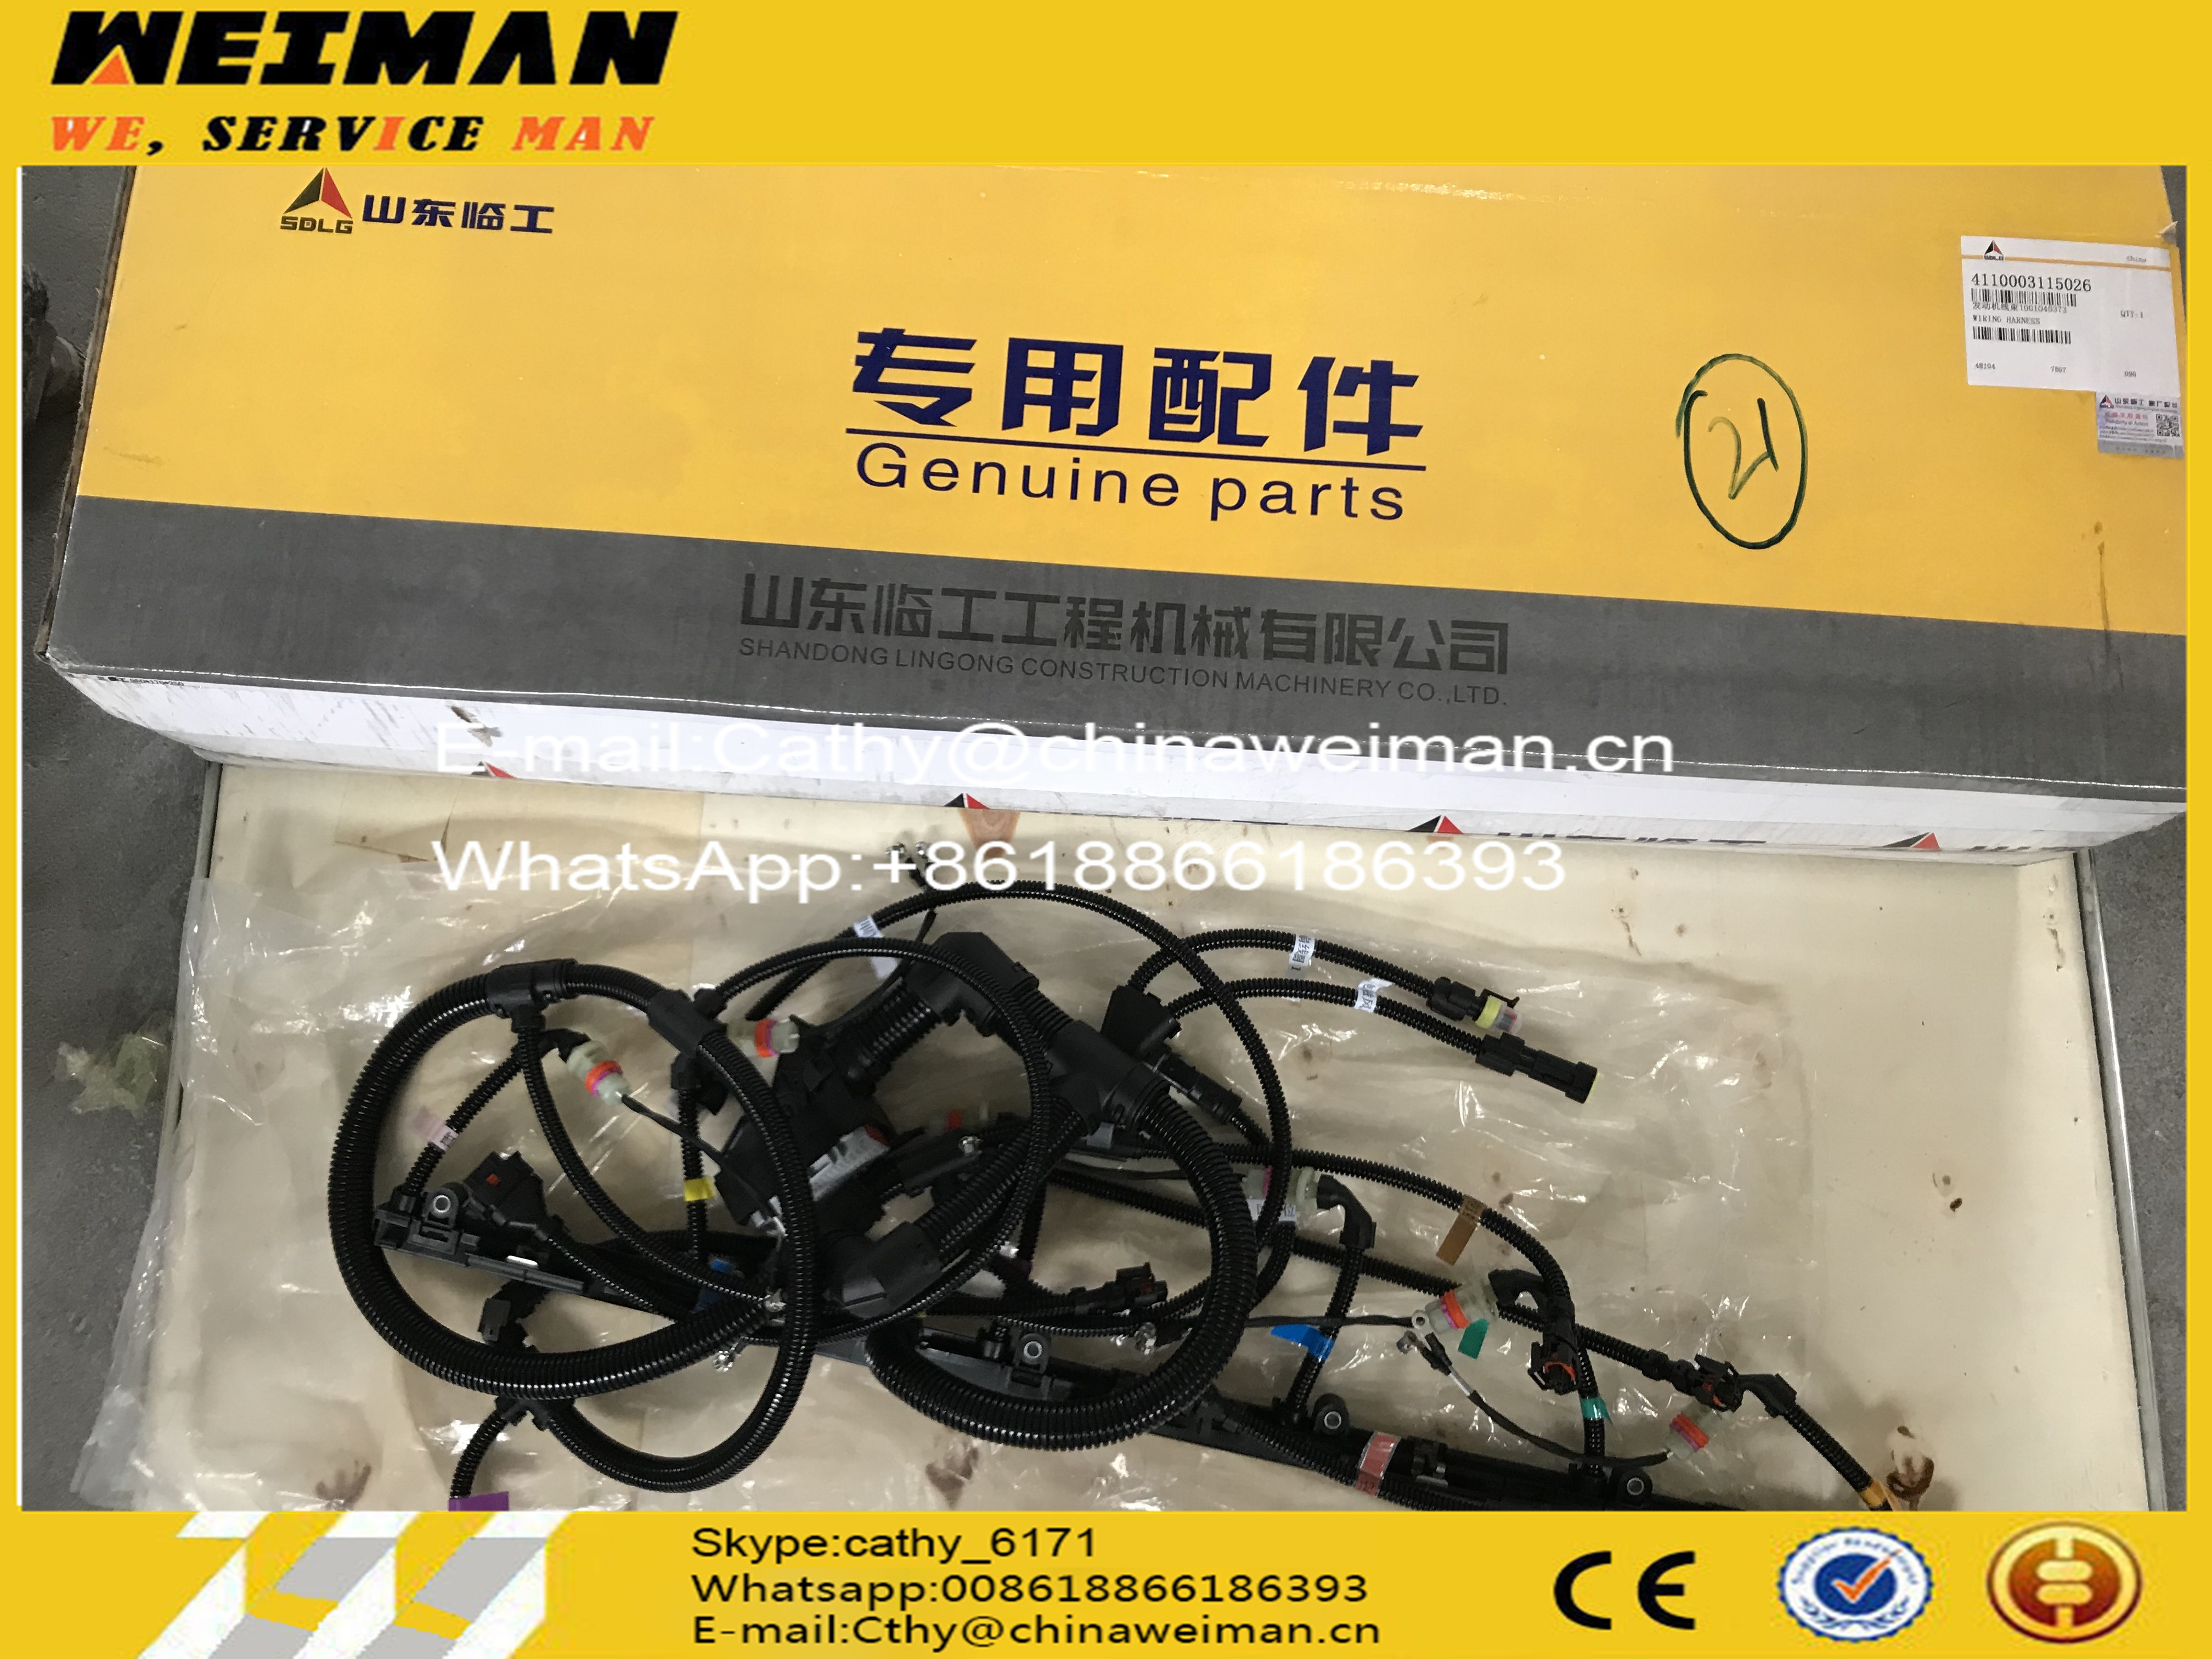 SDLG L953 Wheel Loader Spare Parts 4110003115026 WIRING HARNESS 1001045373